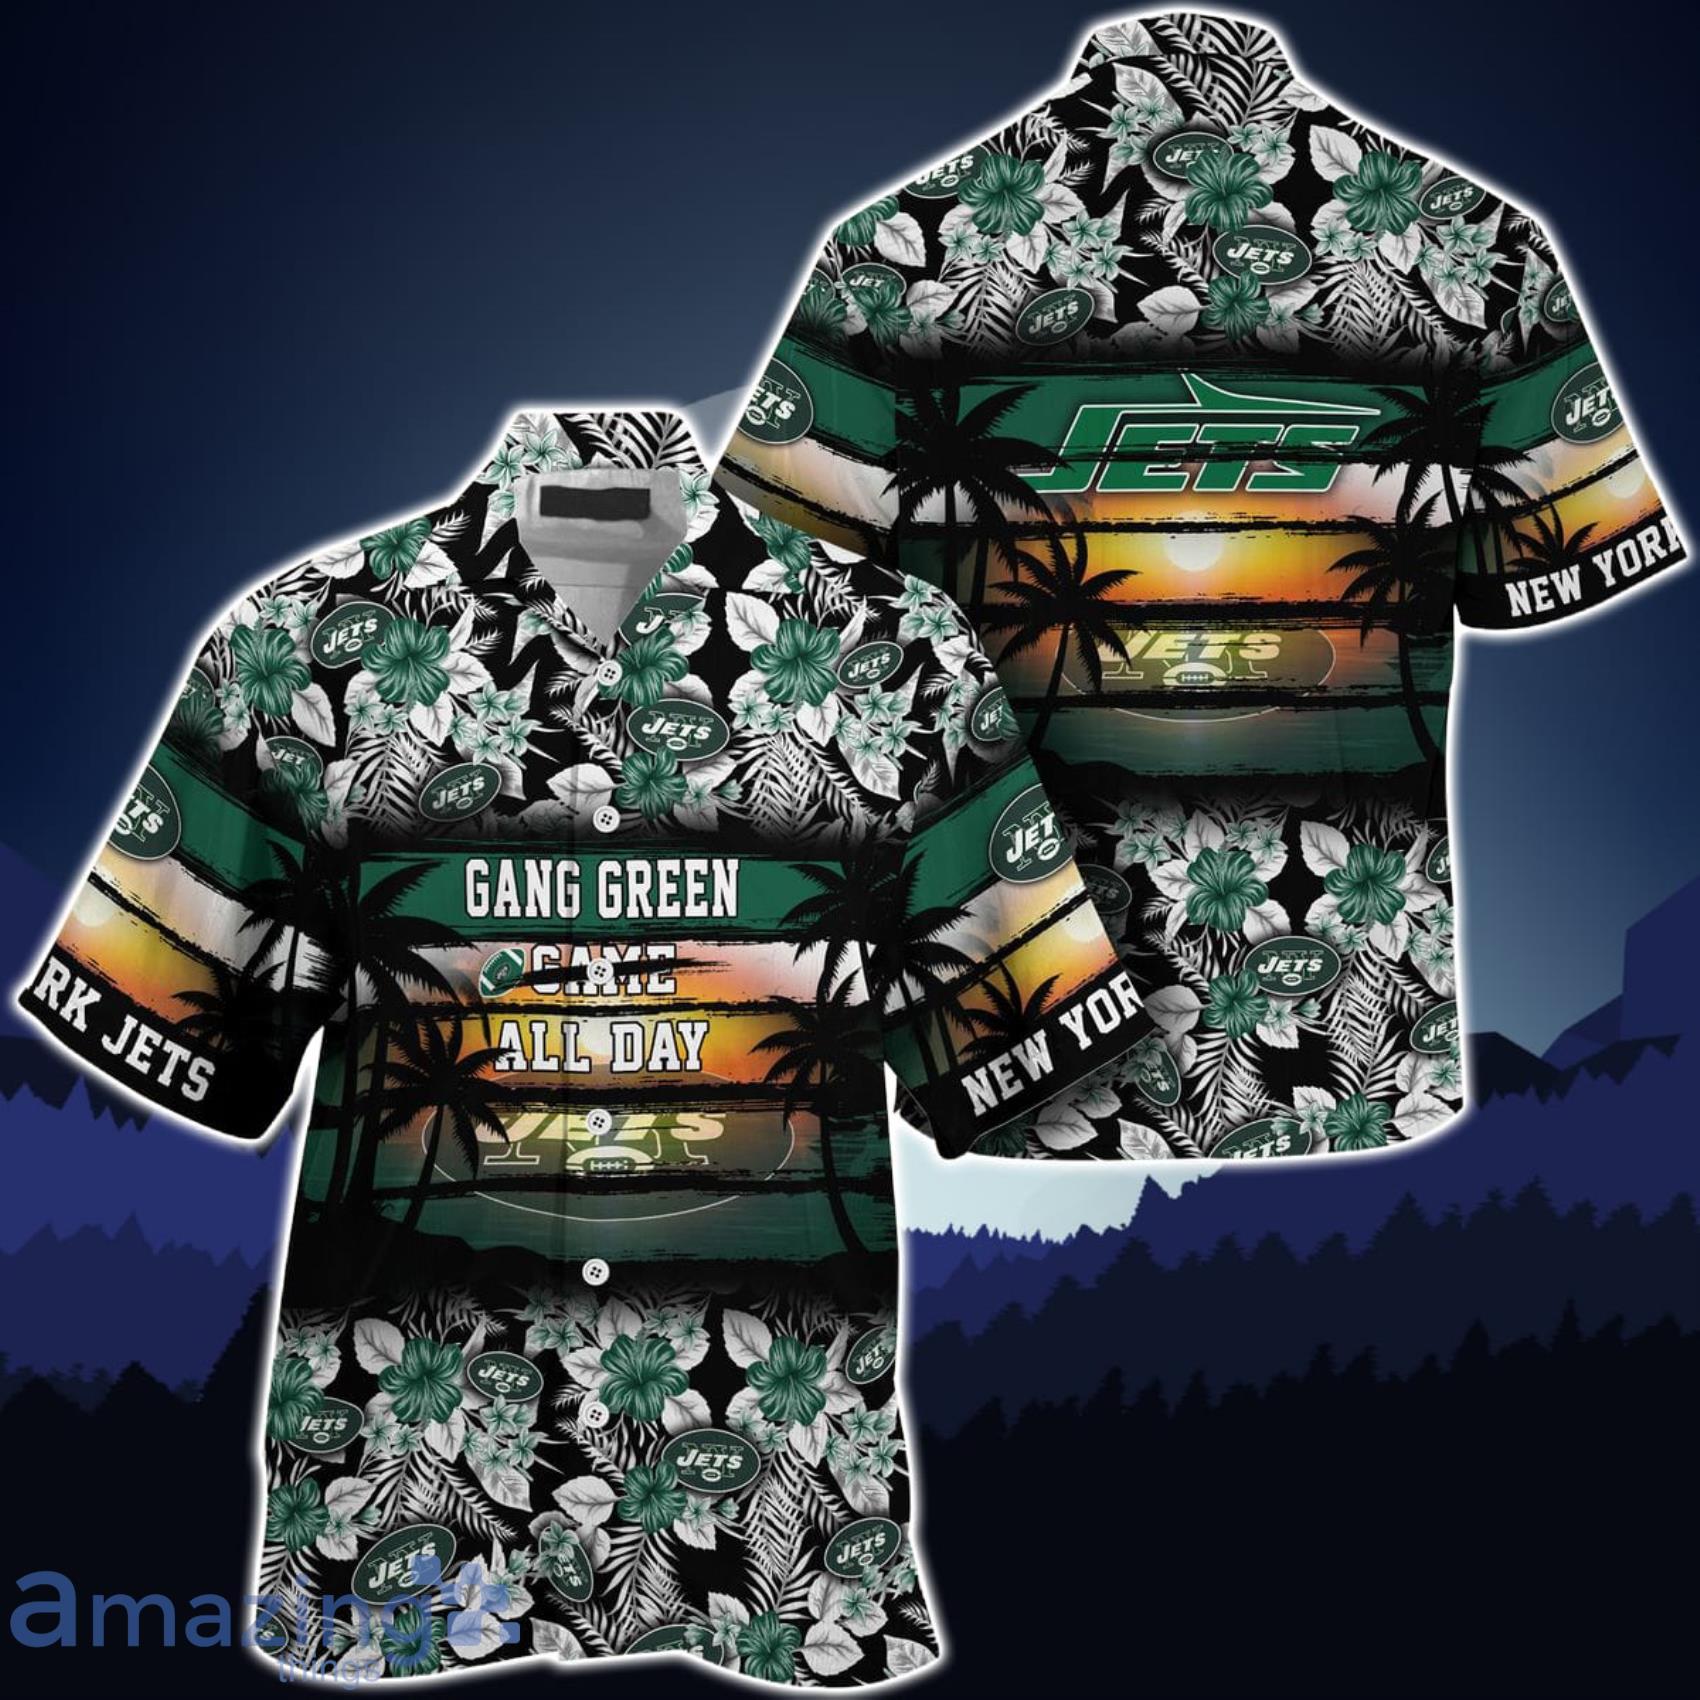 NFL New York Jets Hawaiian Shirt All Over Print, Men, Women, Unisex, Model  - Ingenious Gifts Your Whole Family